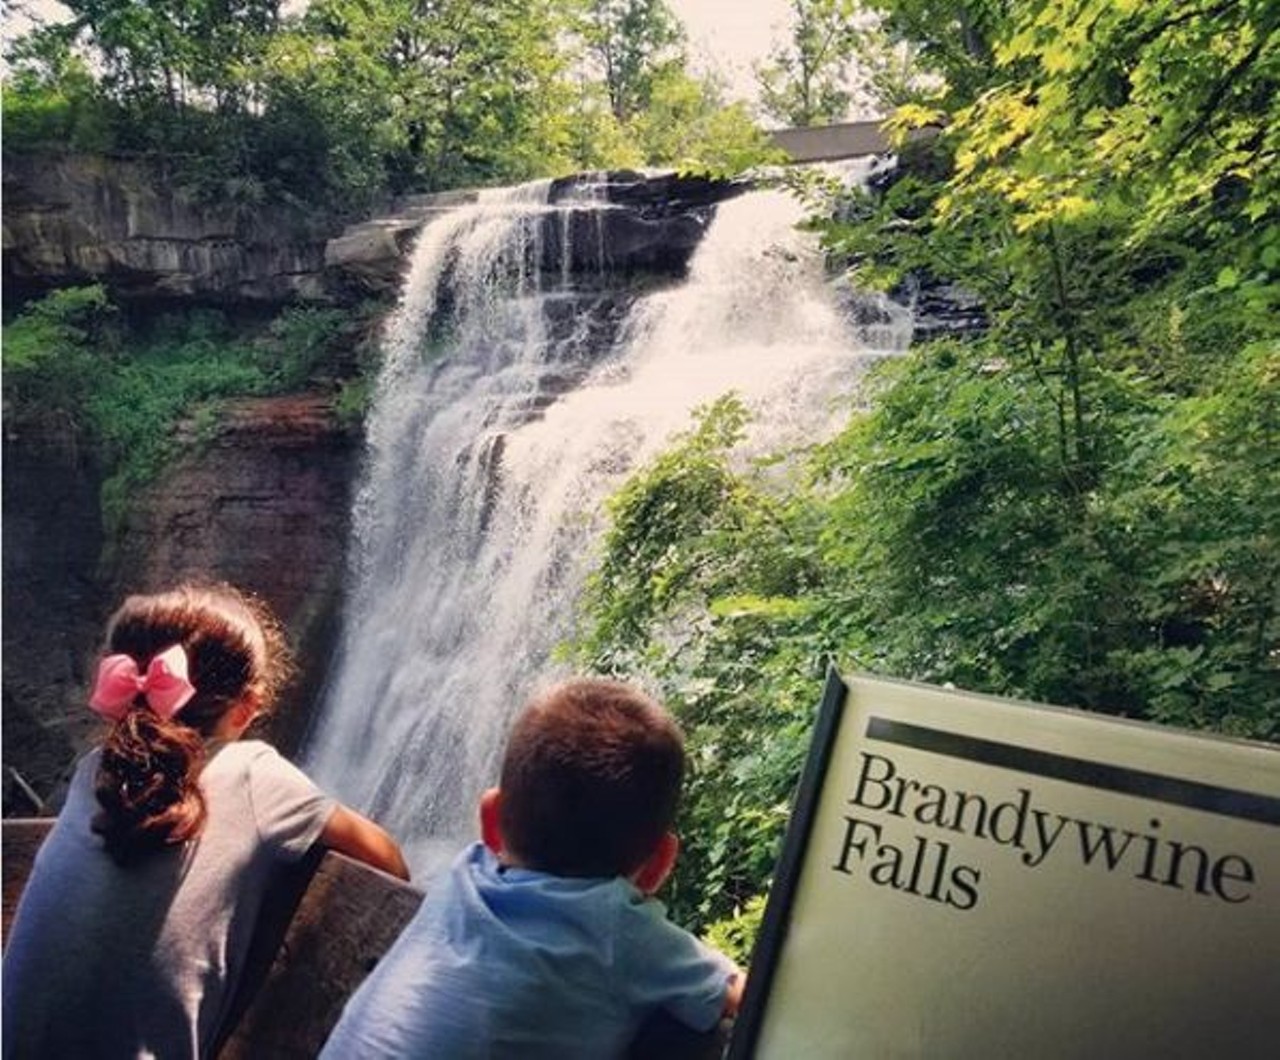  Brandywine Falls
8176 Brandywine Rd., Sagamore Hills 
One of the most popular attractions in Cuyahoga Valley National Park, the 65-feet-tall Brandywine Falls is accessible by a boardwalk and offers a serene scene. Brandywine Falls is about a 35 minute drive from Cleveland.
Photo via joebeyercle/Instagram